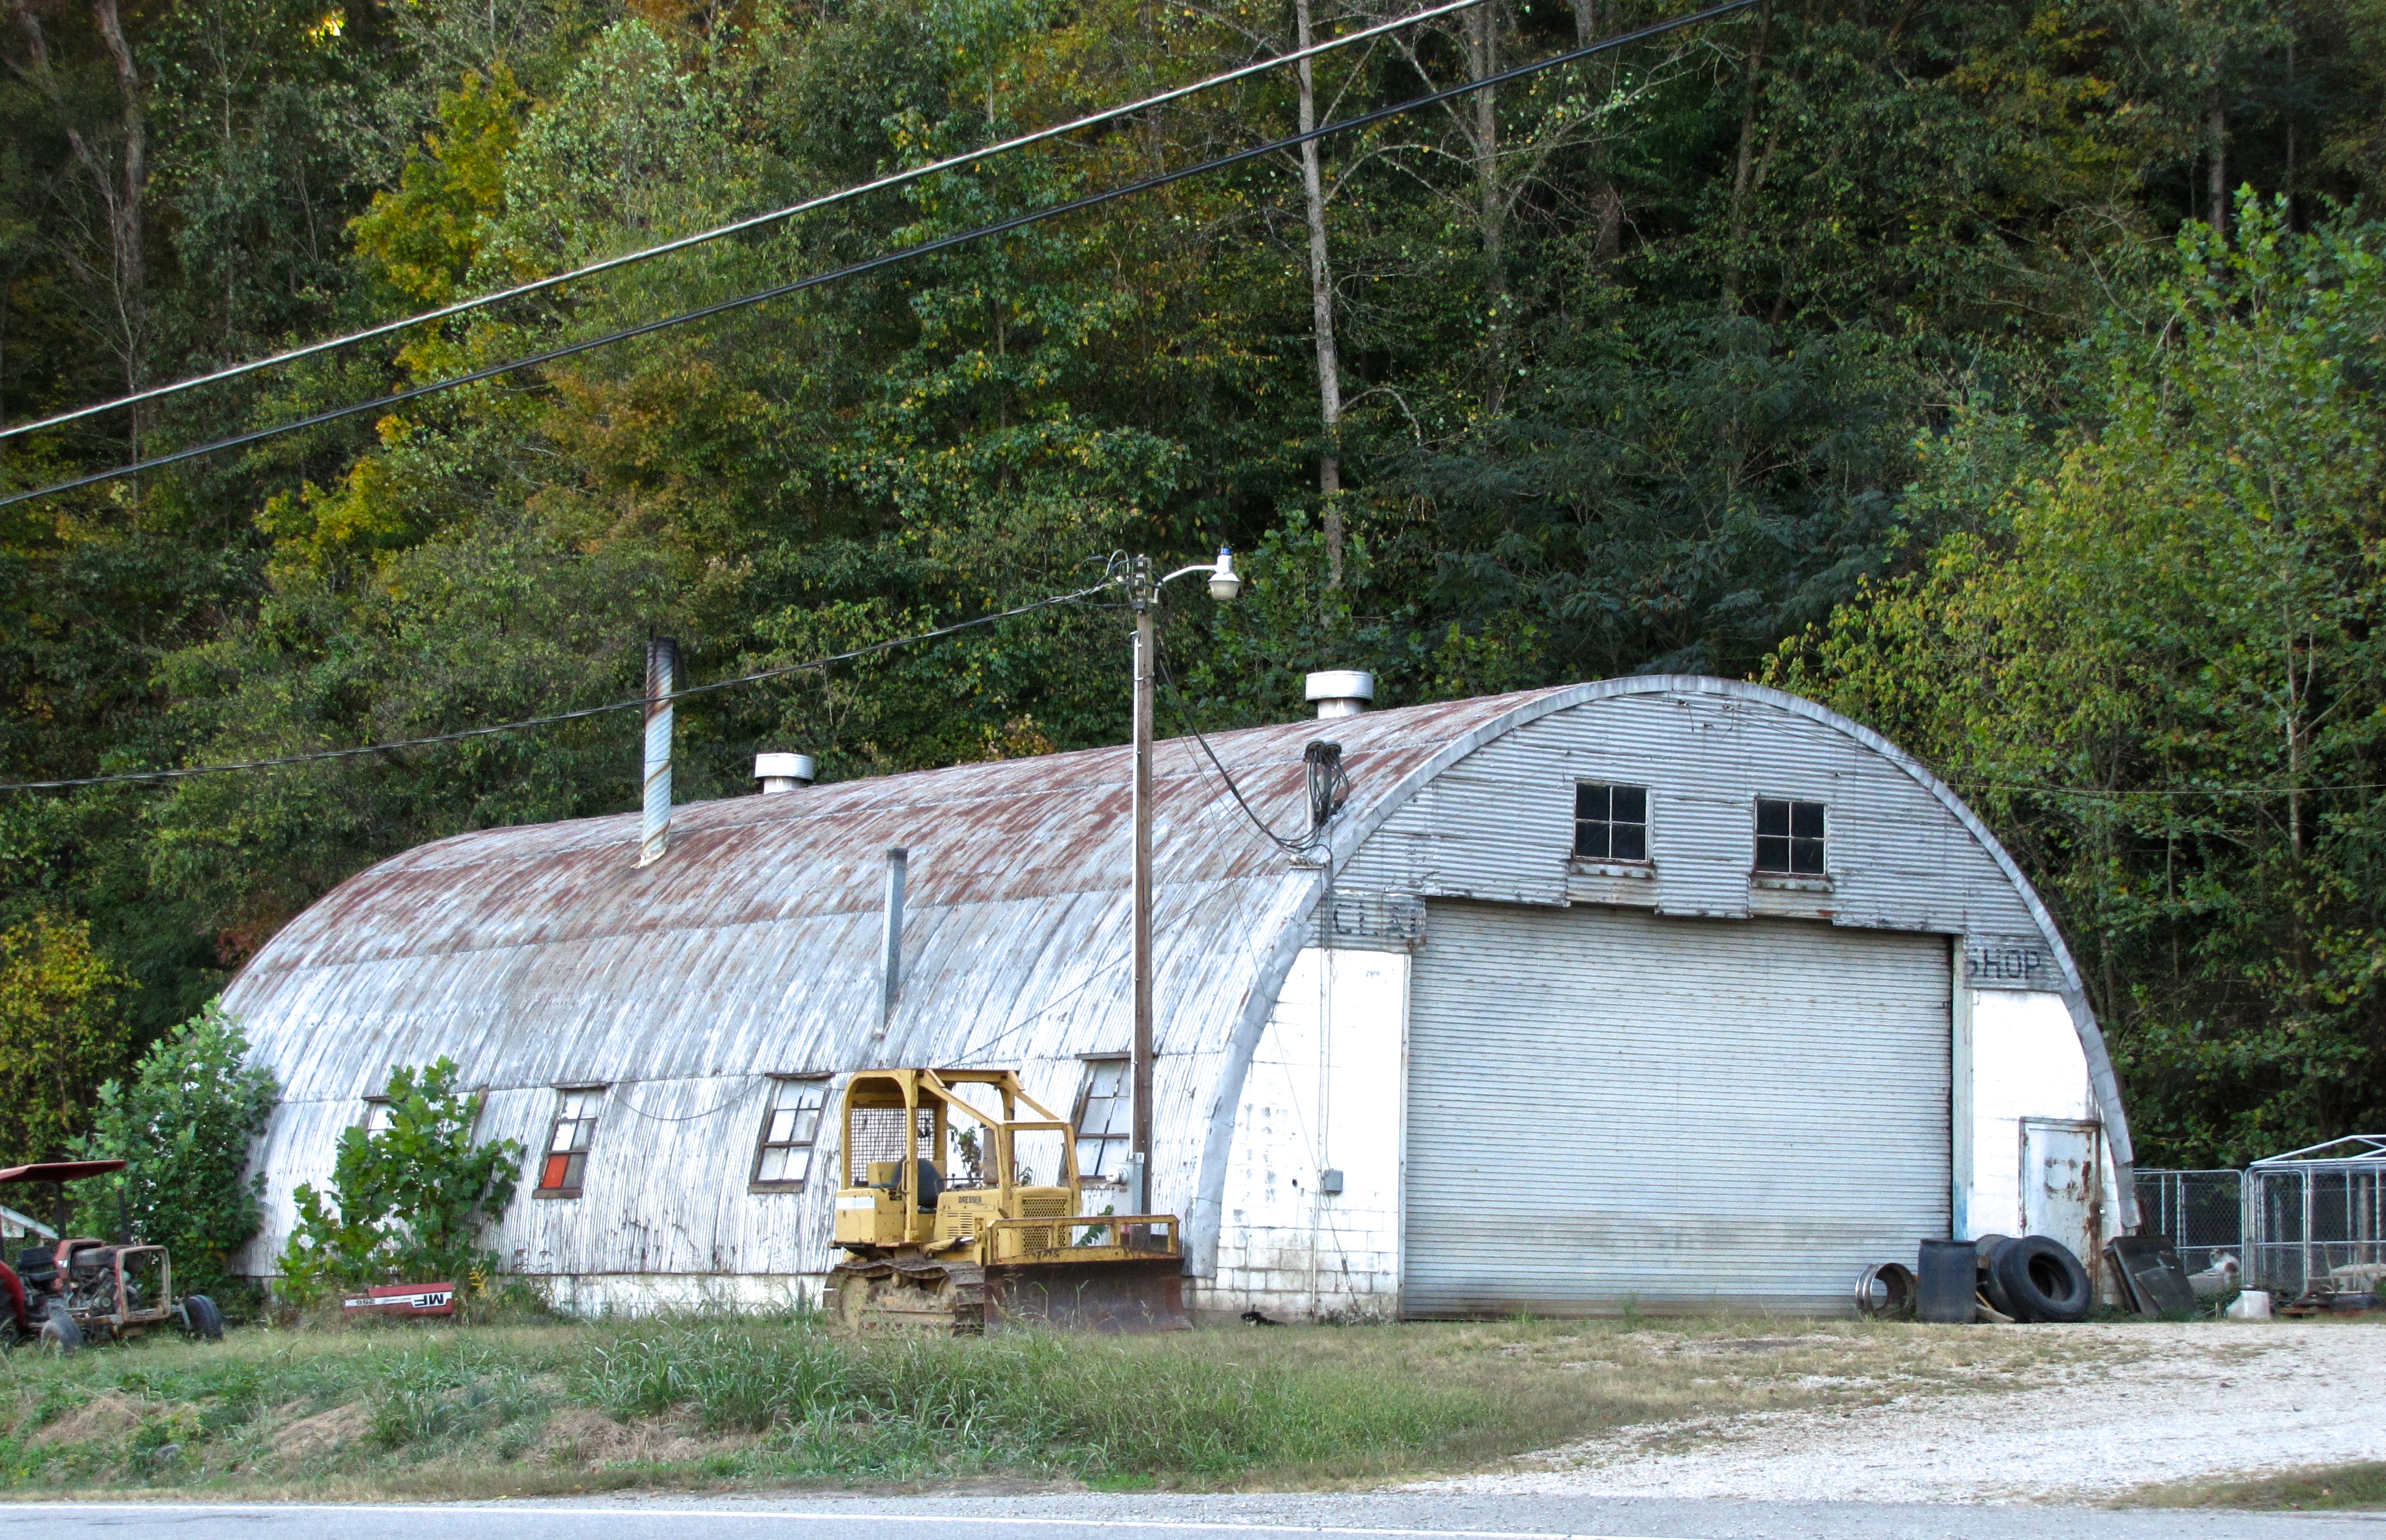 quonset hut in South Kingstown, RI